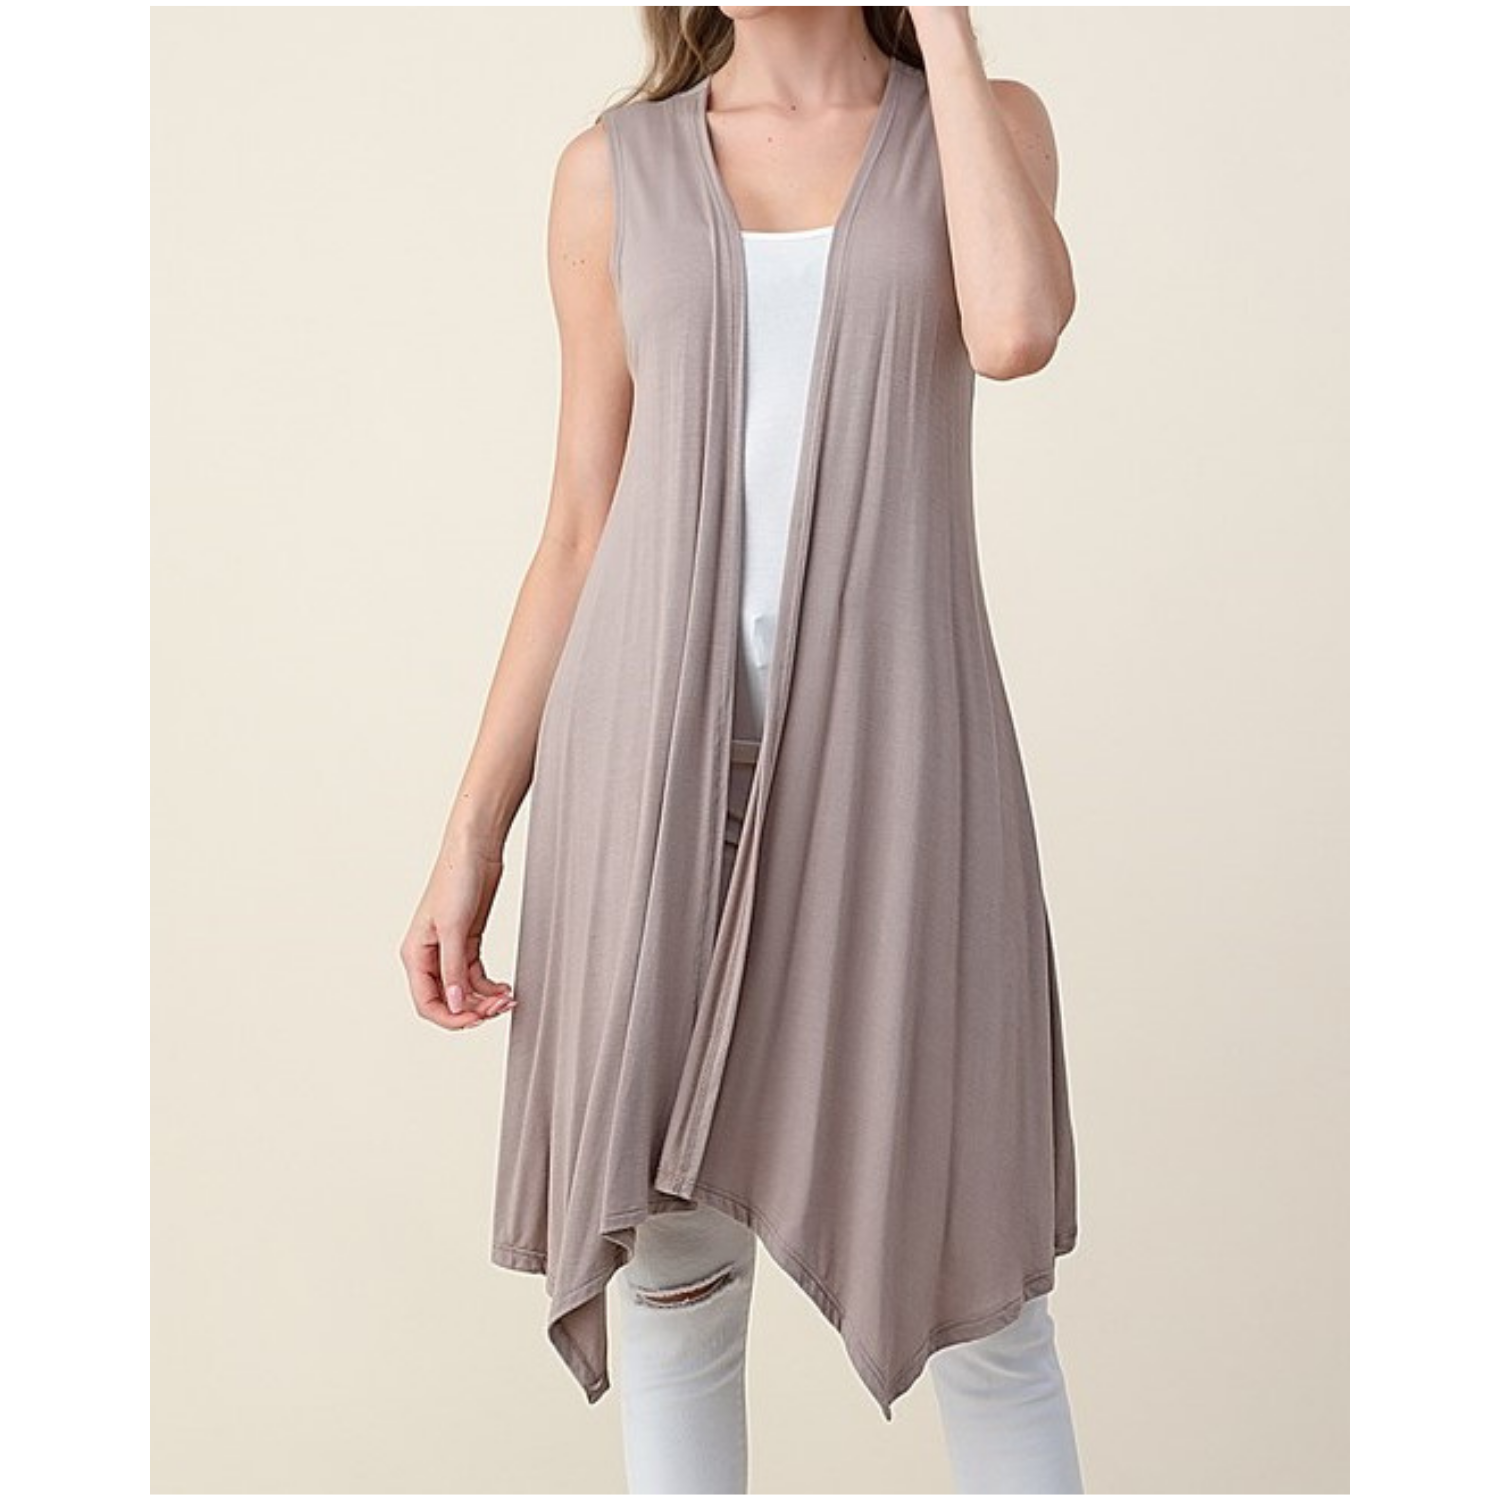 Is That The New Crisscross Back Knit Tank Top ??